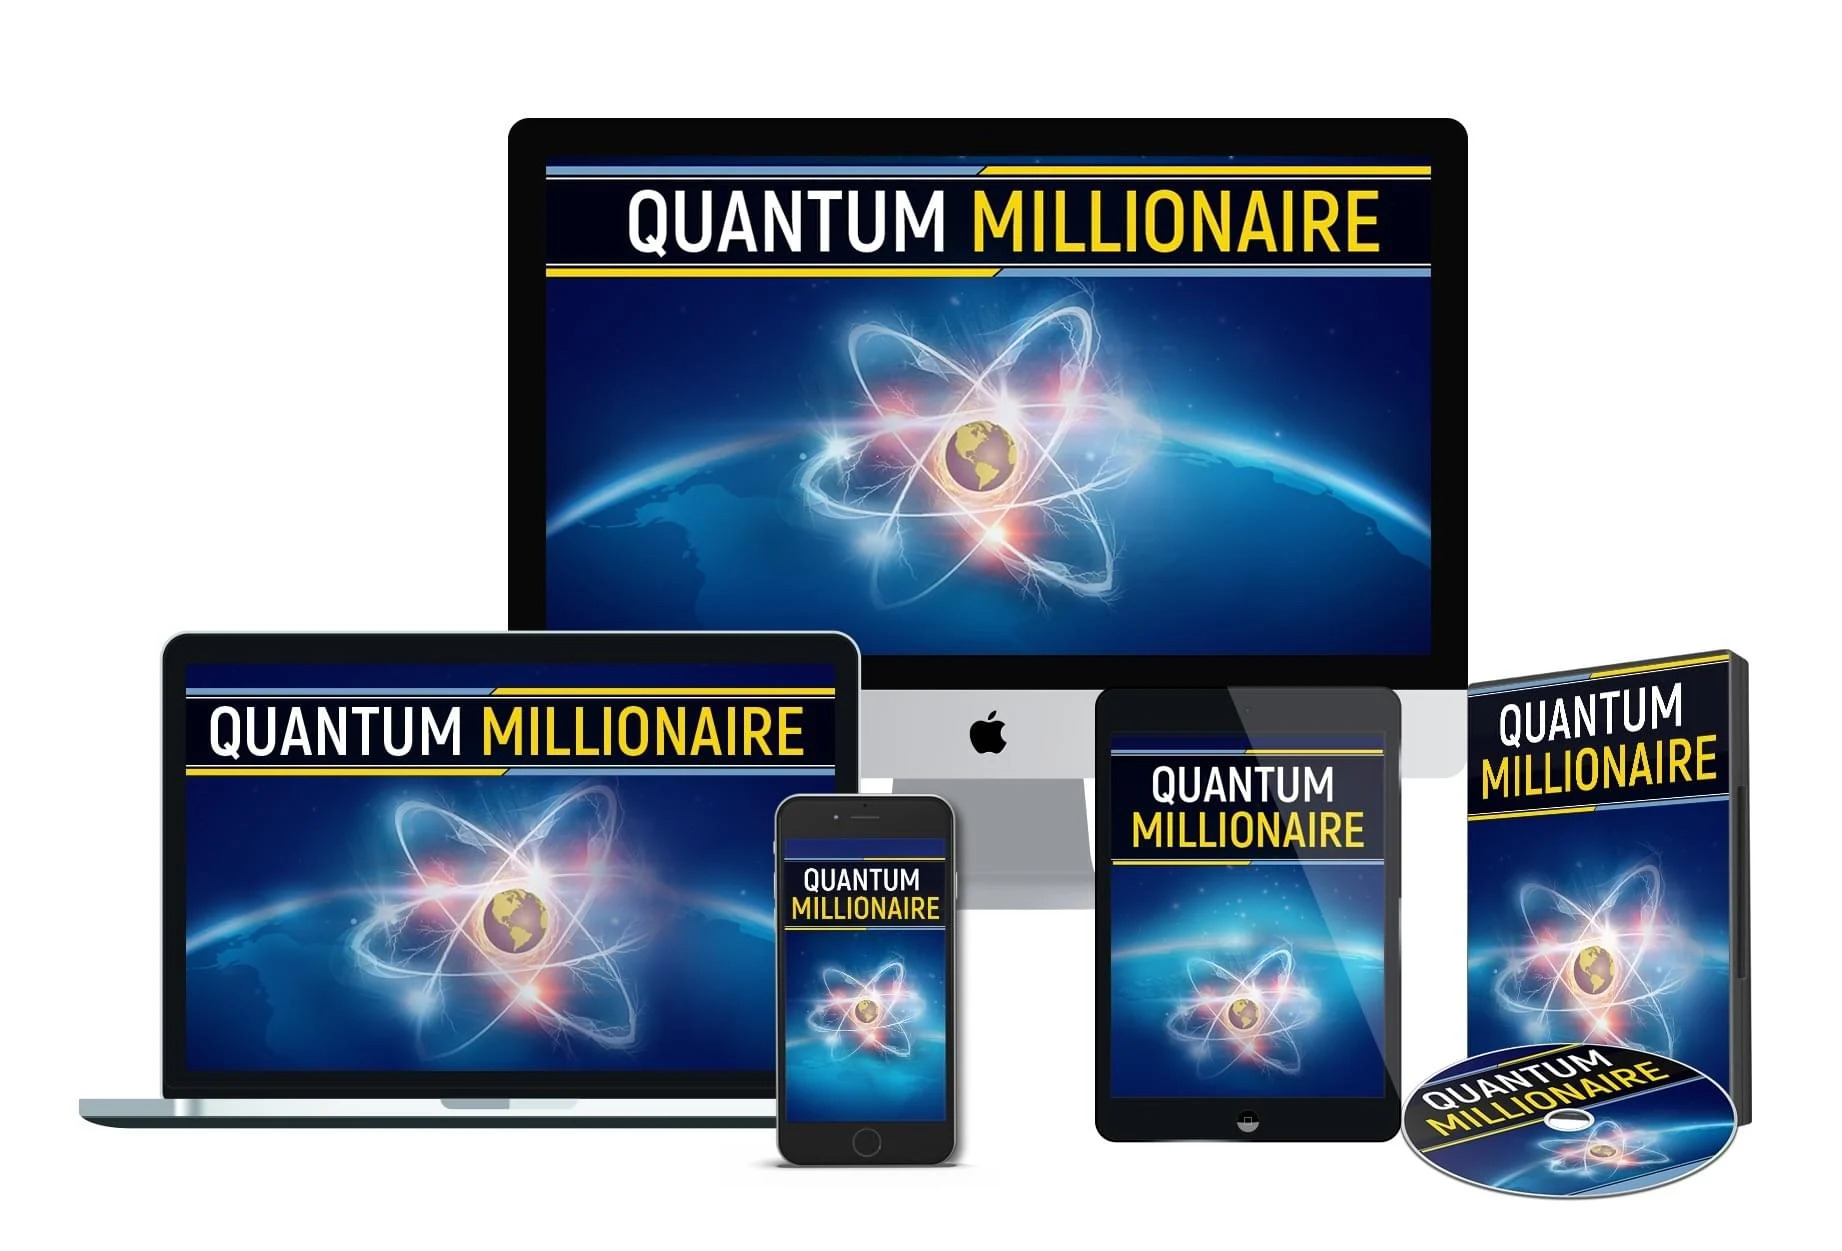 Quantum Millionaire Reviews: Does it Really Work?